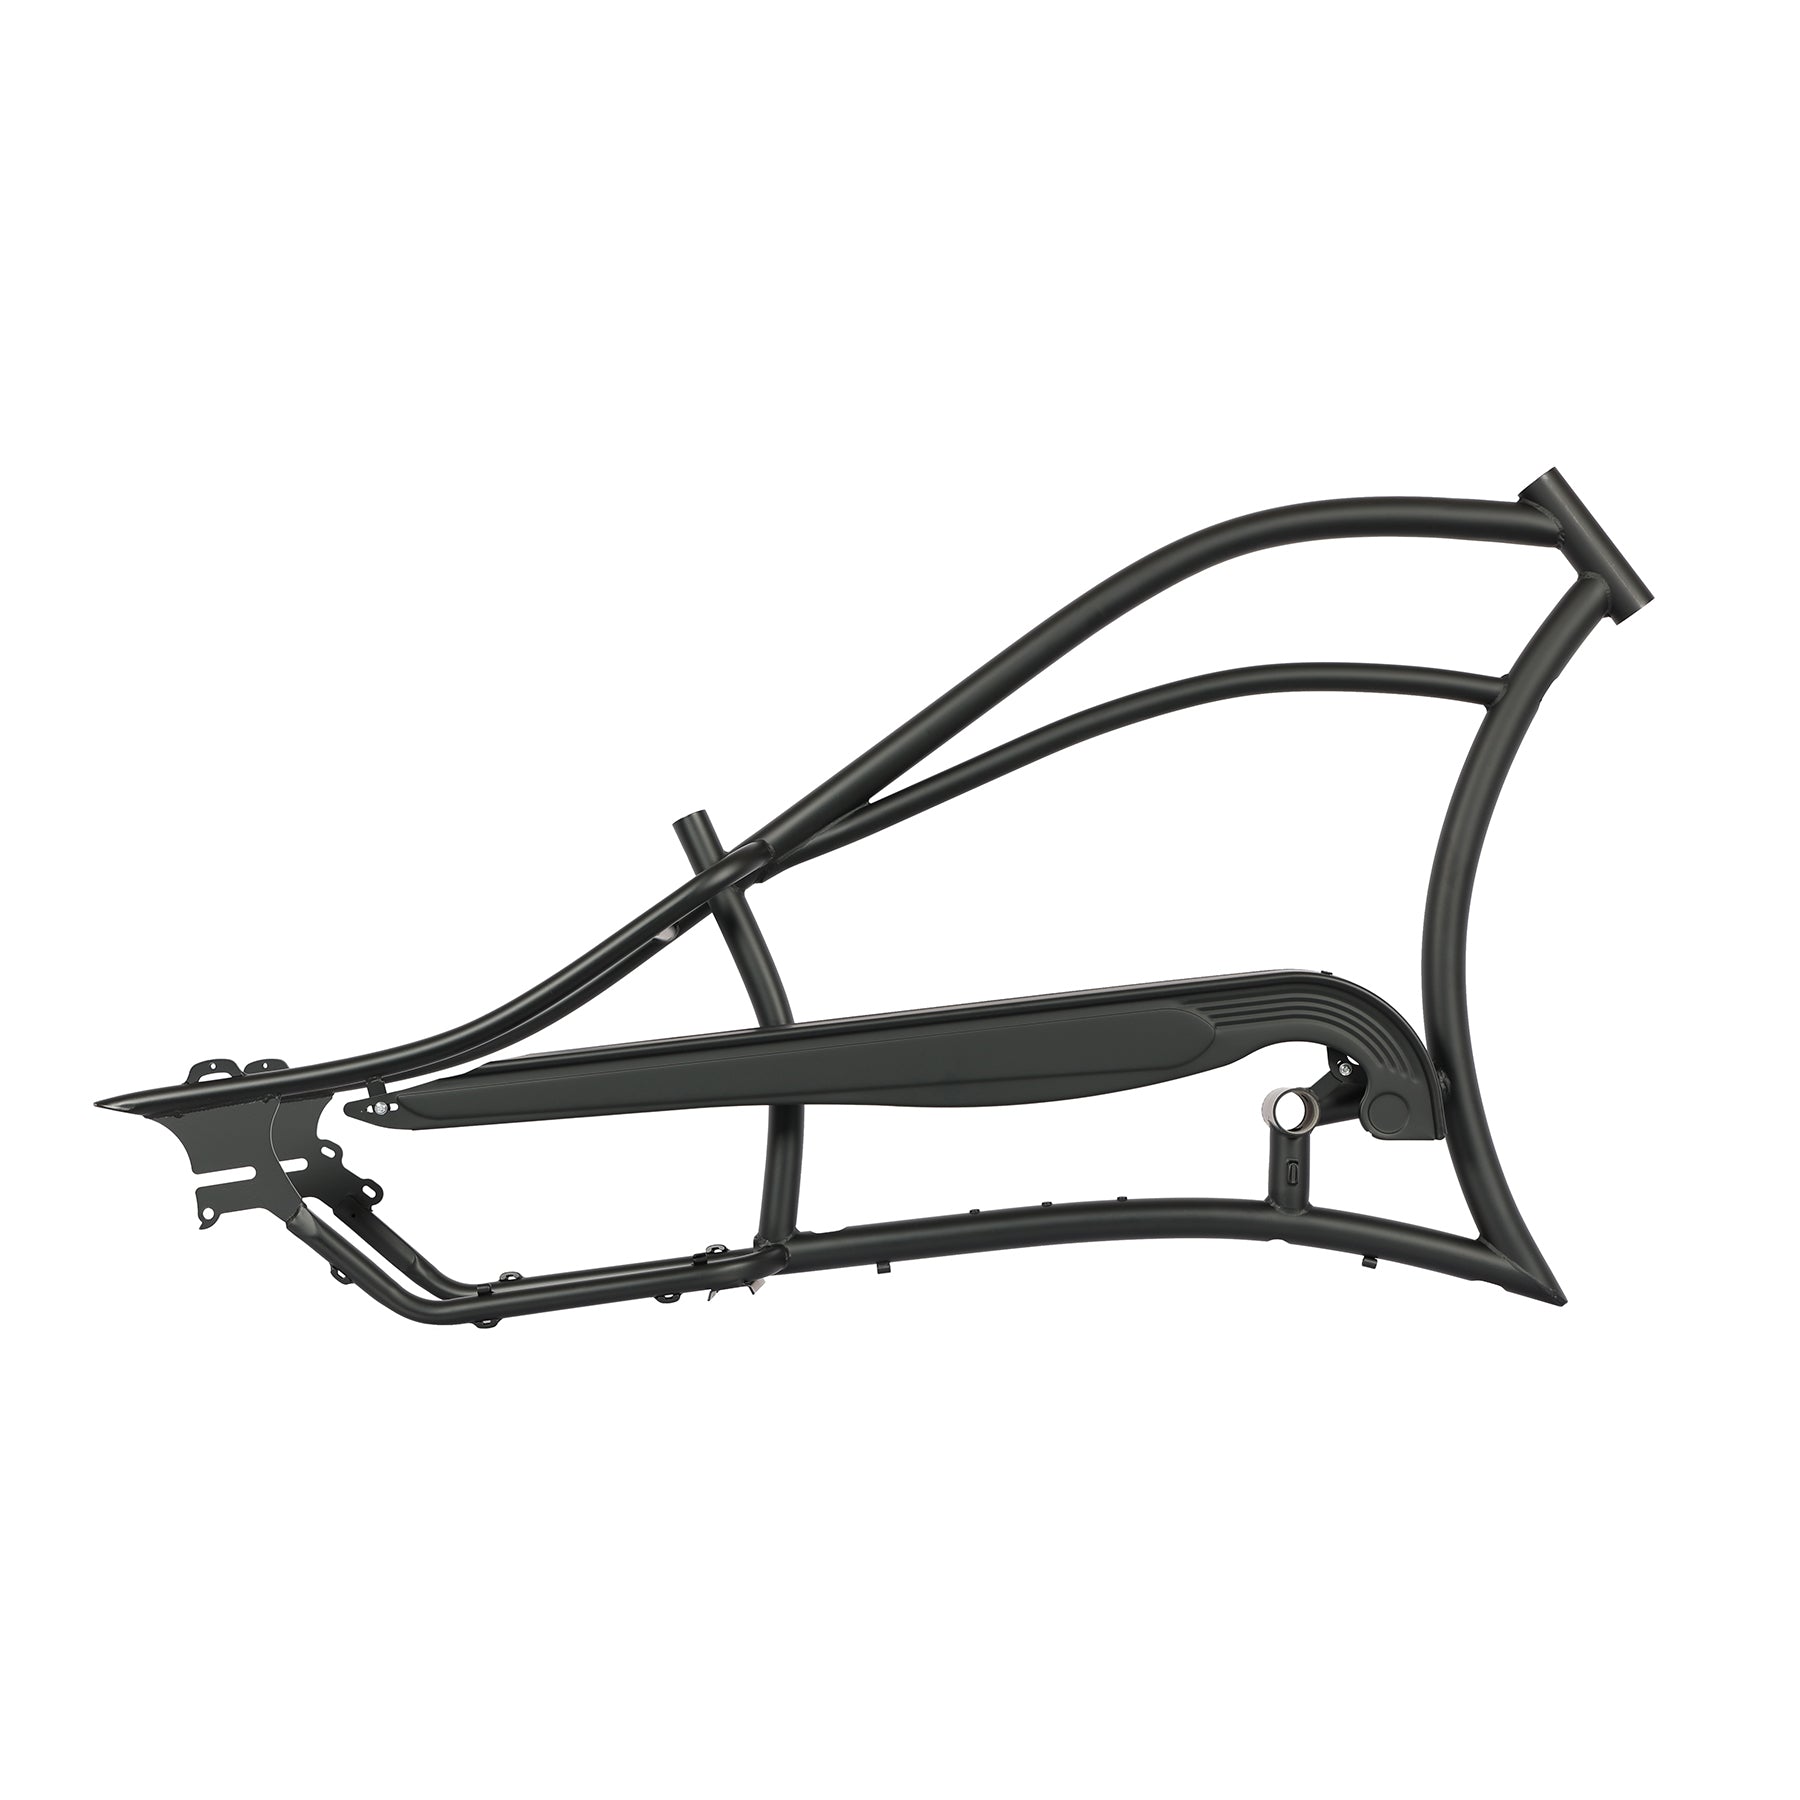 Tracer Tracker GT7 Frame with Chainguaid